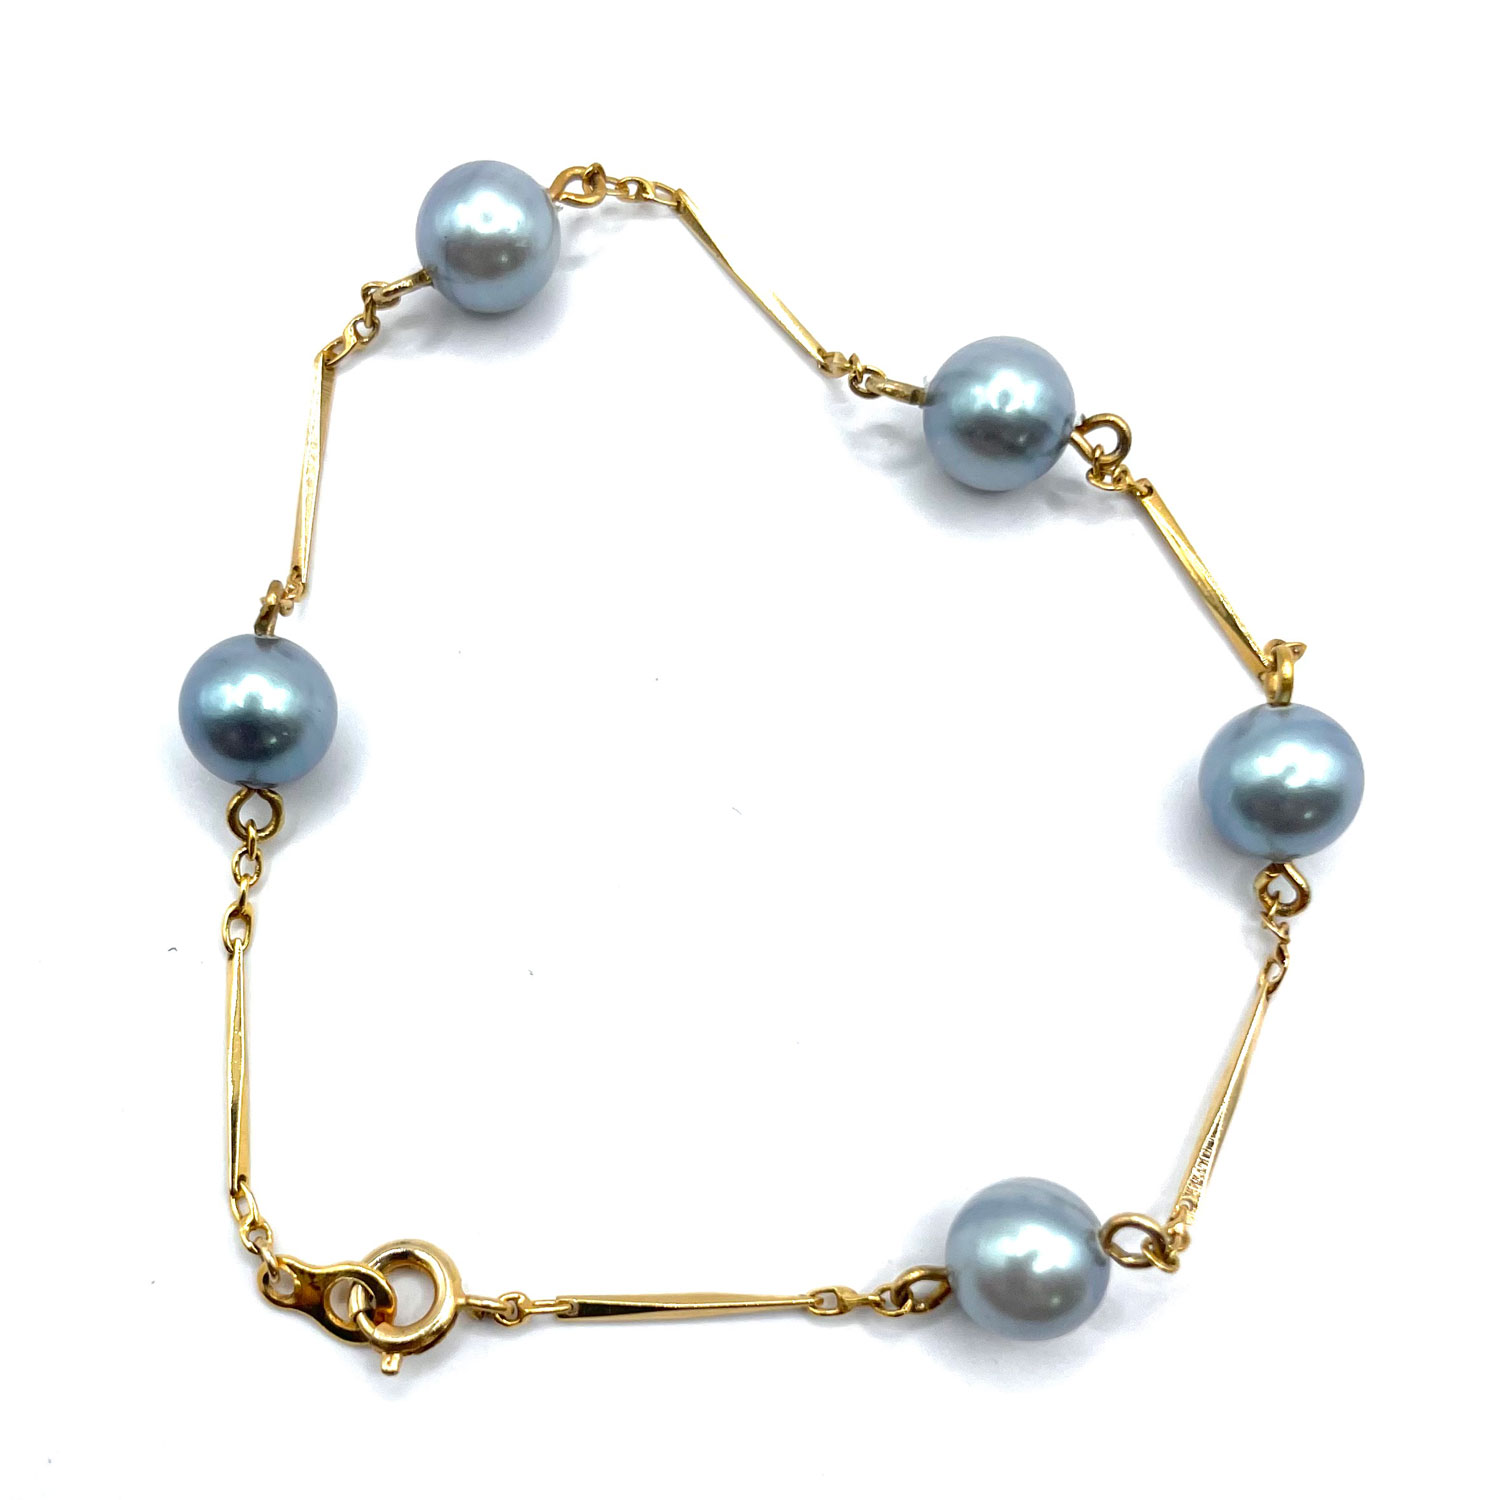 Grey faux pearl necklace